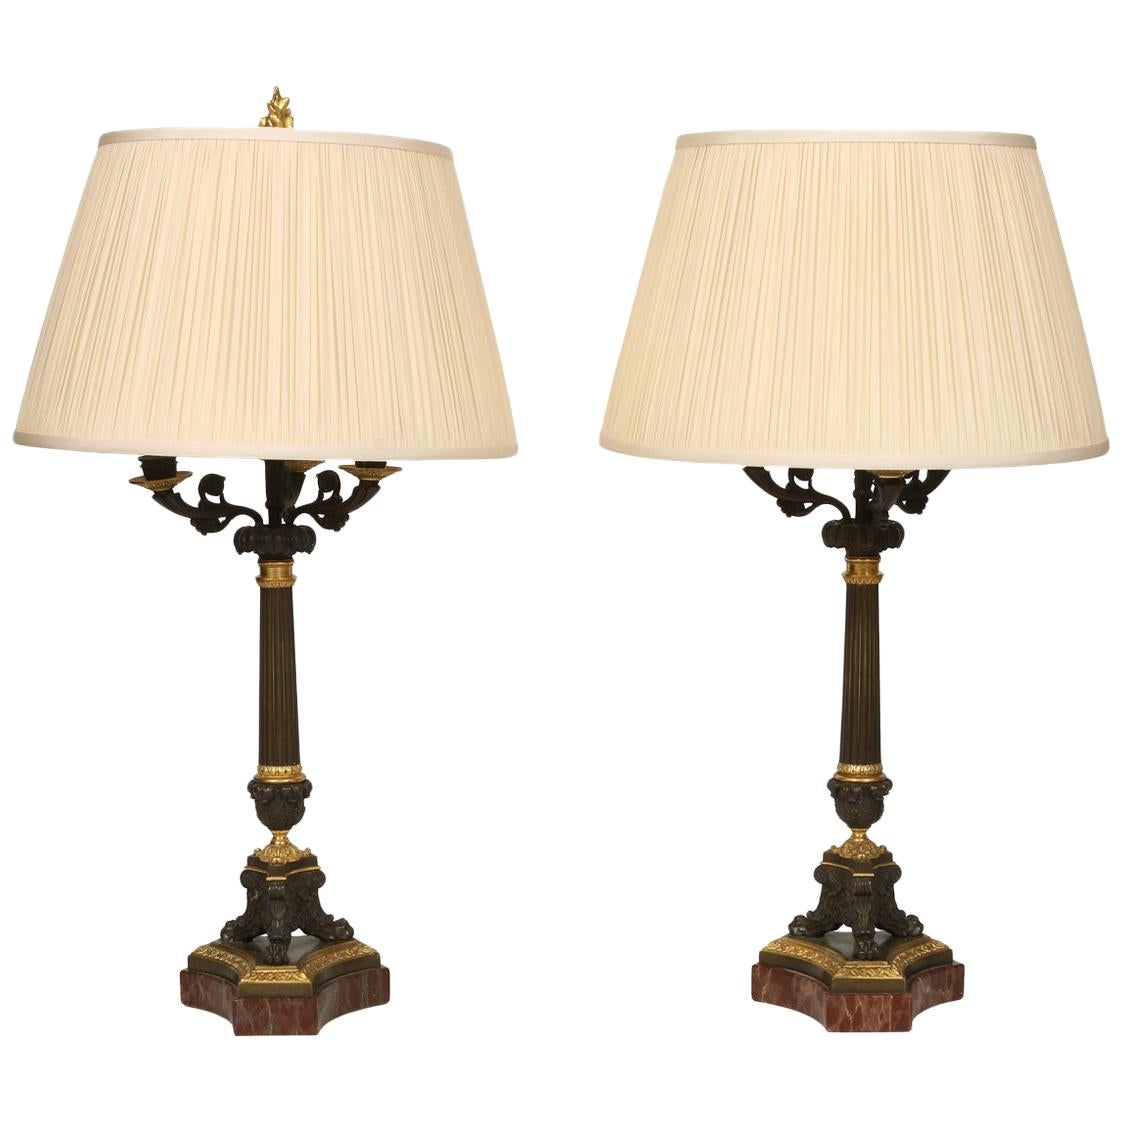 Pair of French Napoleon Bronze and Gilt Metal Candlestick Lamps